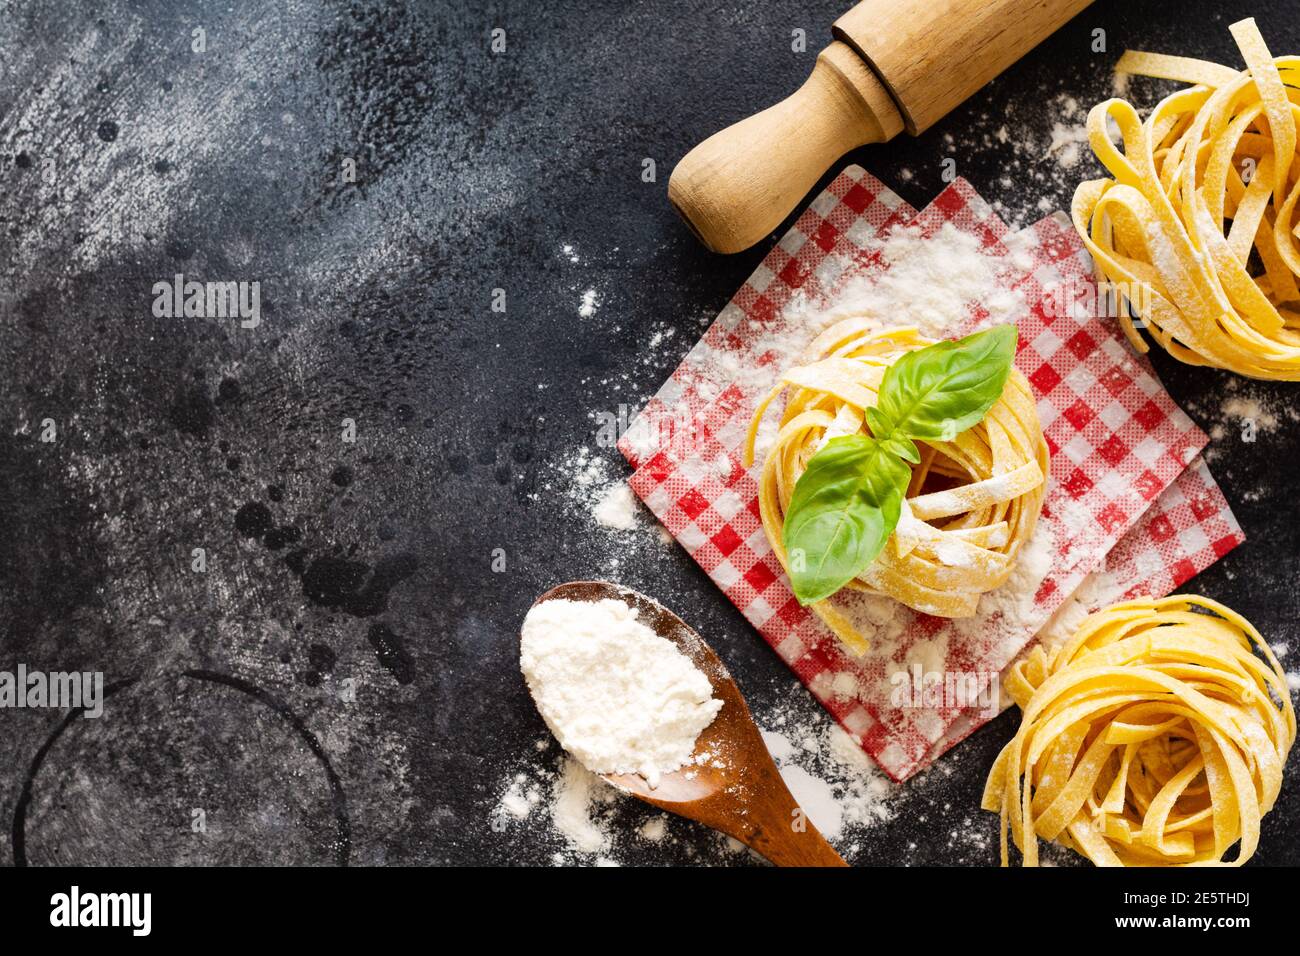 Cooking concept. Ingredients for traditional Italian homemade pasta tomatoes, raw egg, basil leaf on the dark concrete background table. Top view with Stock Photo